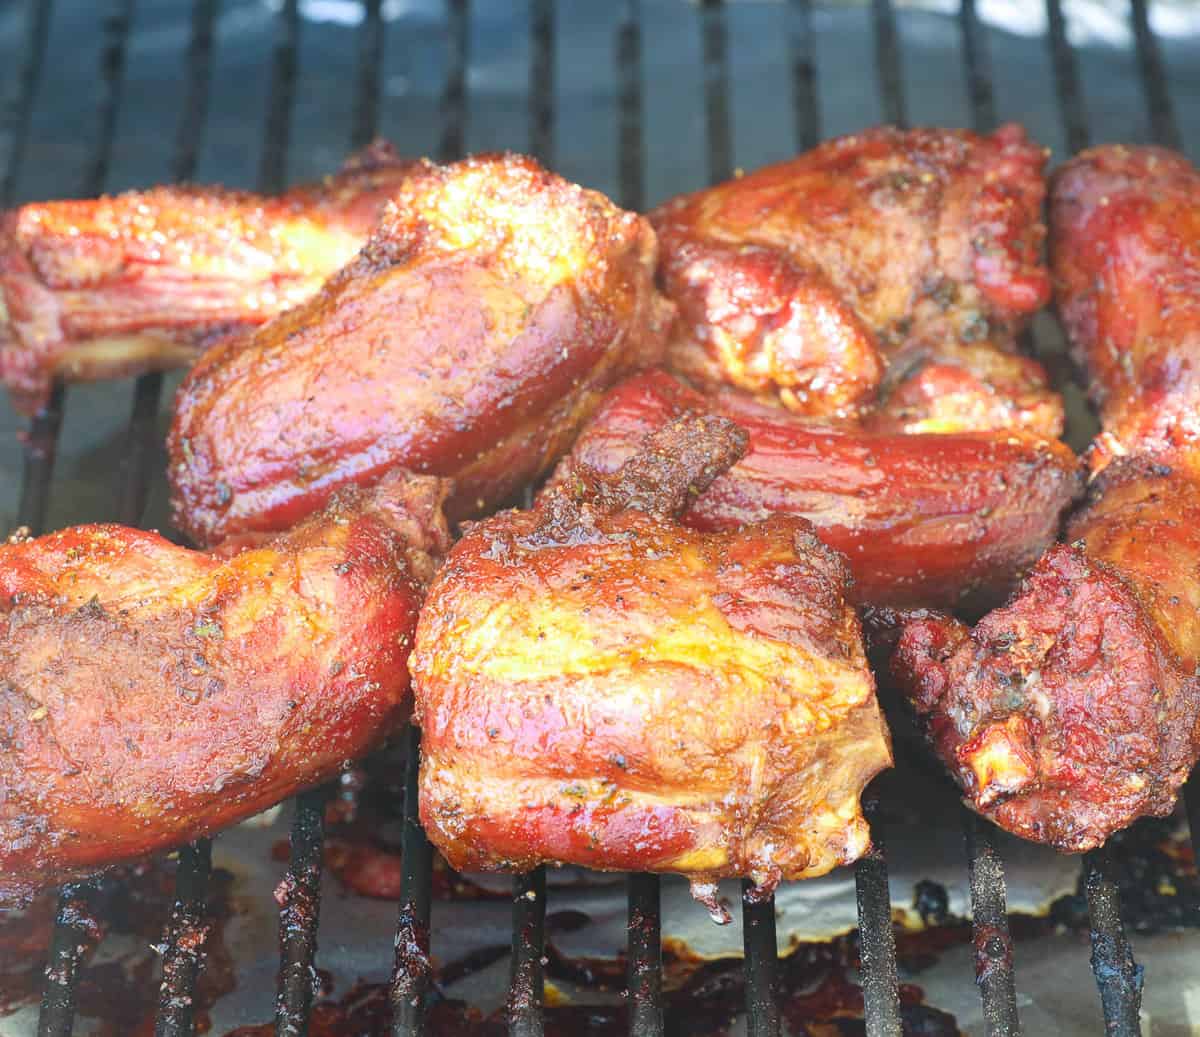 Substantial, savory smoked turkey necks waiting for you